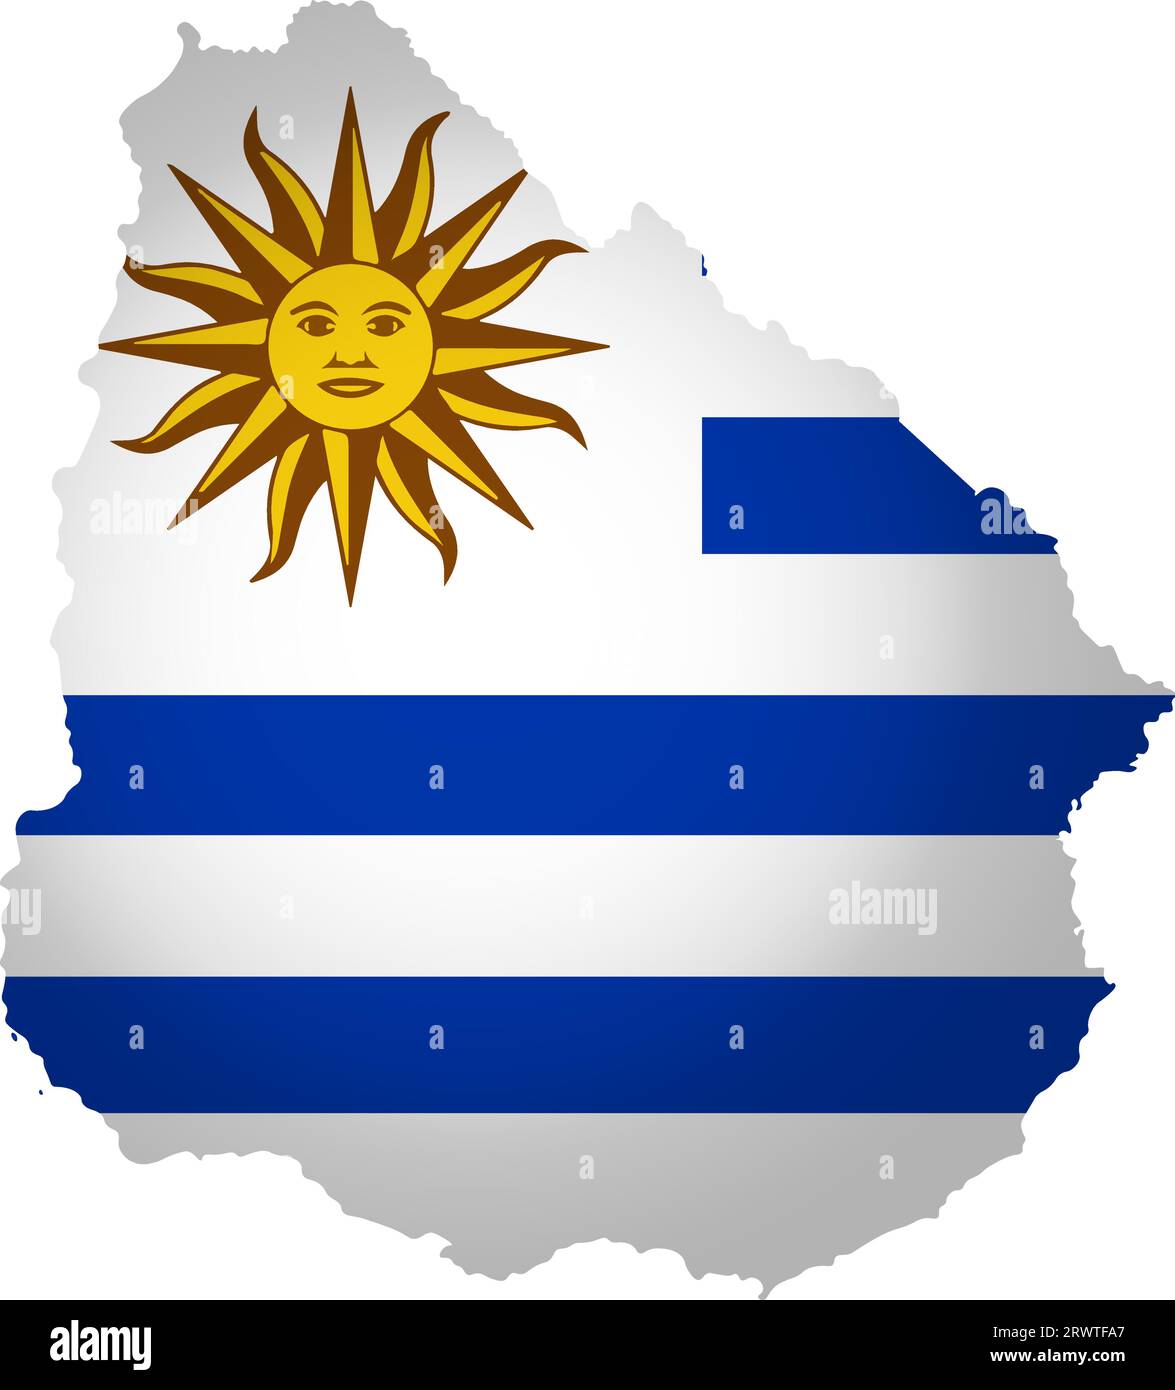 Illustration with national flag with simplified  shape of Uruguay map (jpg). Volume shadow on the map. Stock Vector